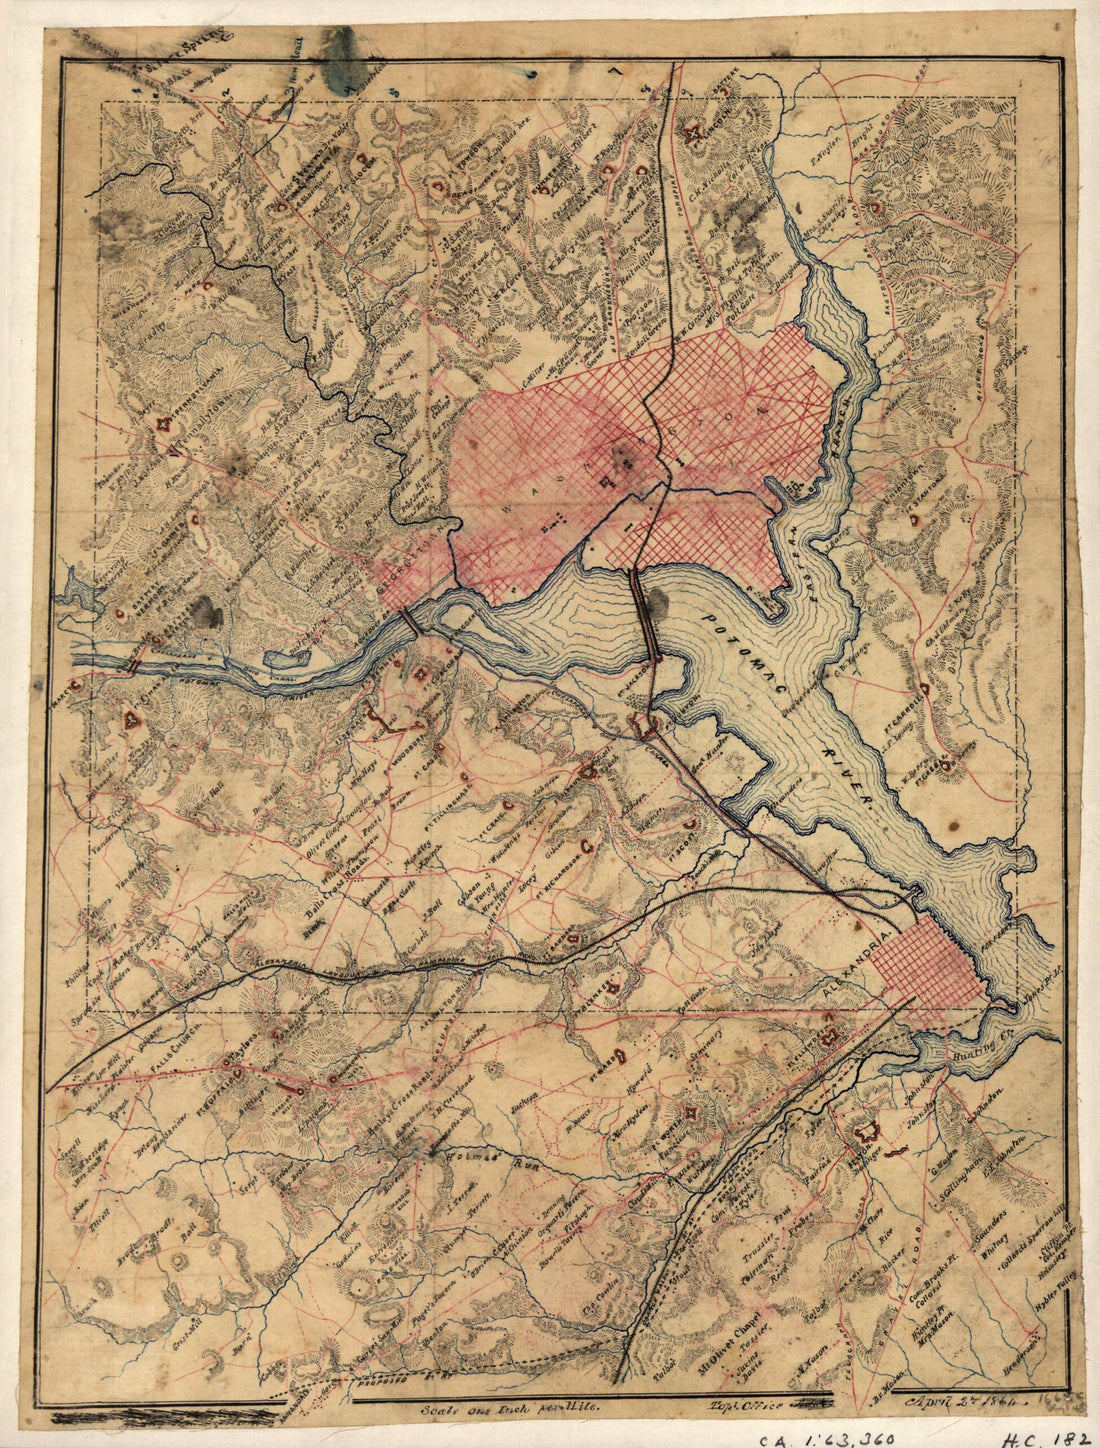 This old map of Topographical Map of the District of Columbia and Adjacent Areas In Virginia, Showing Fortifications from 1864 was created by  in 1864